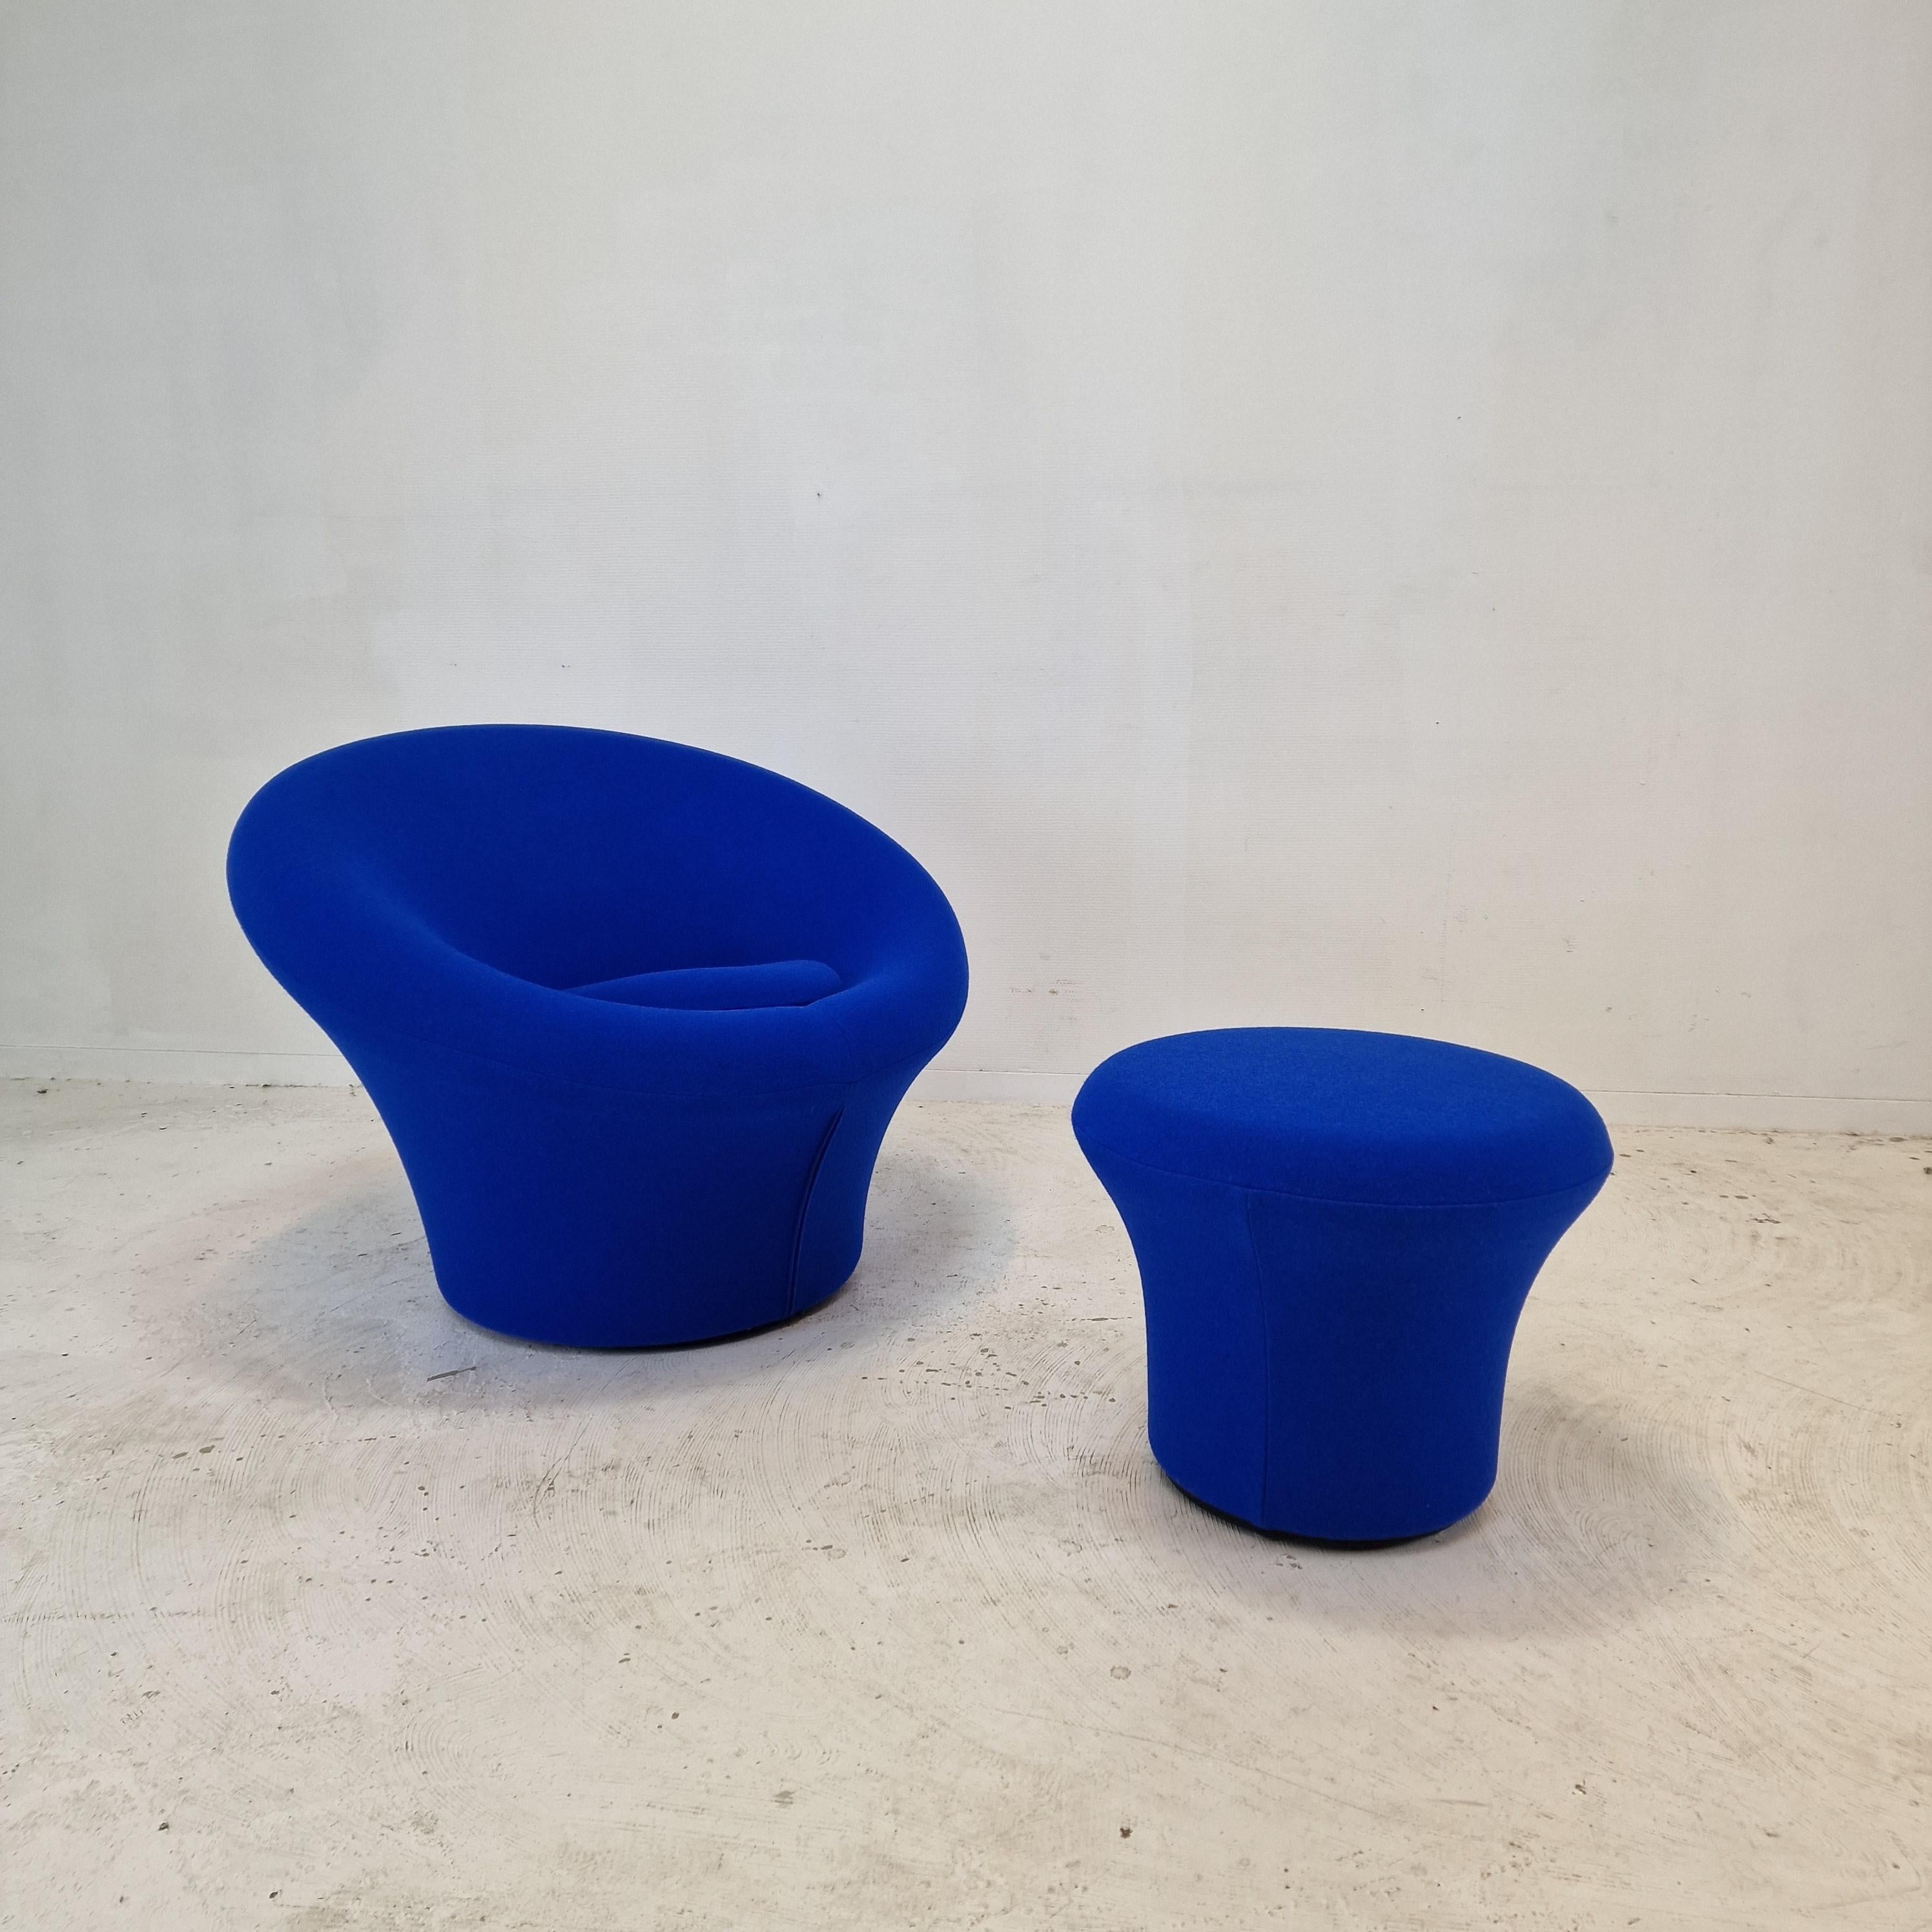 Very comfortable and cosy Artifort Mushroom chair with Ottoman, designed by Pierre Paulin in the 60s. 
This particular set is fabricated in 2021.

Covered with the original blue Kvadrat Tonus wool fabric.

This set is in very good or perfect